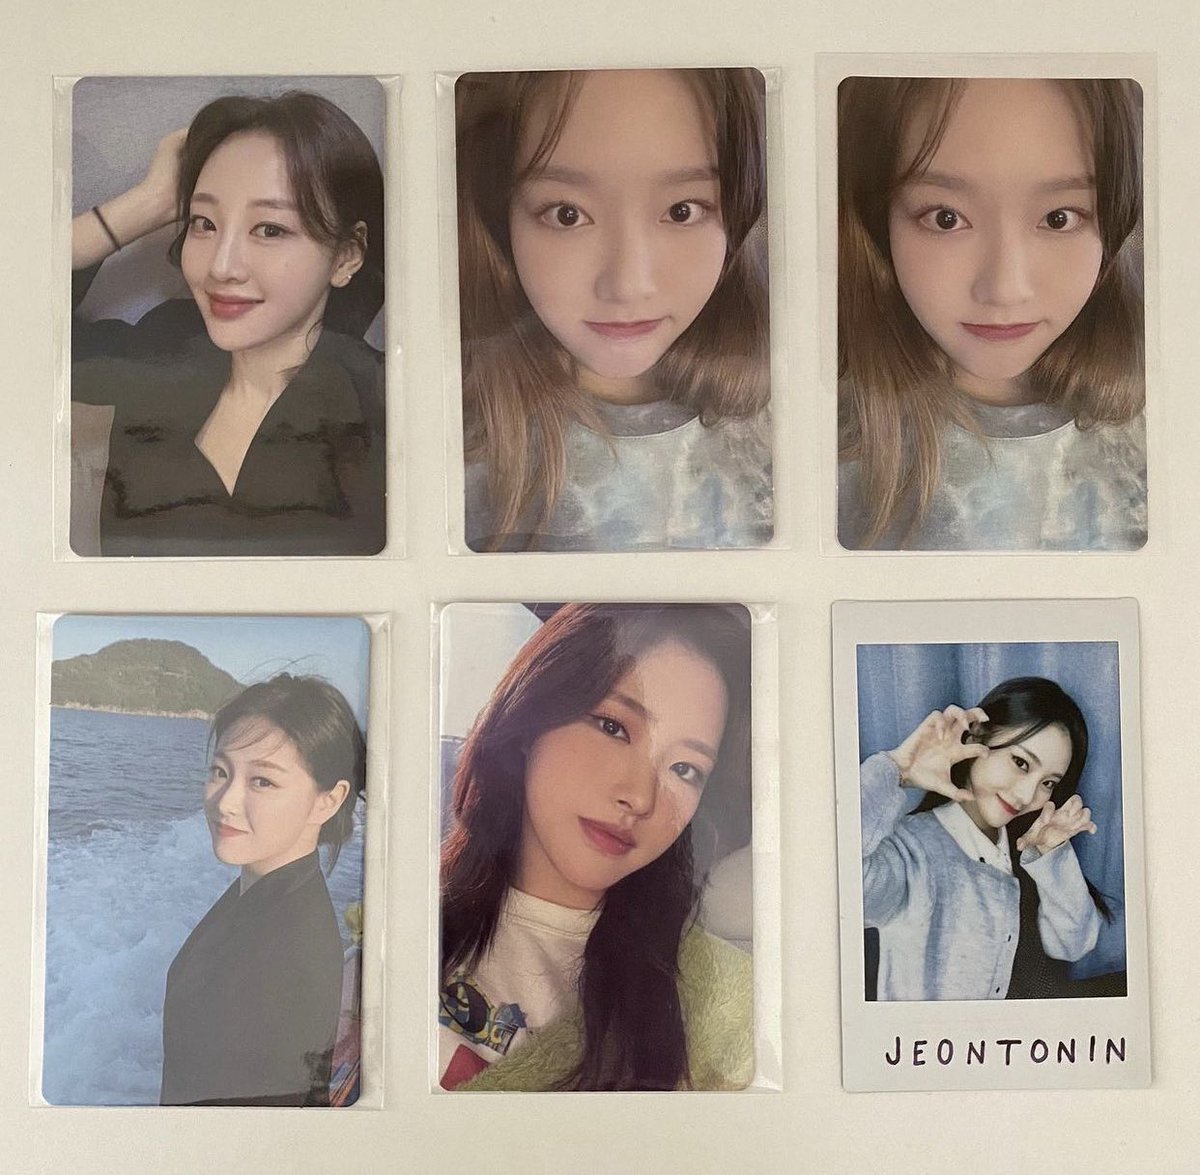 jeontonin is my instagram my proofs are on there if you wanted to see 

tags wtt want to trade heejin hyunjin haseul  yeojin vivi kim lip jinsoul choerry yves chuu gowon hyeju olivia hye 

not for sale until i find jinsoul